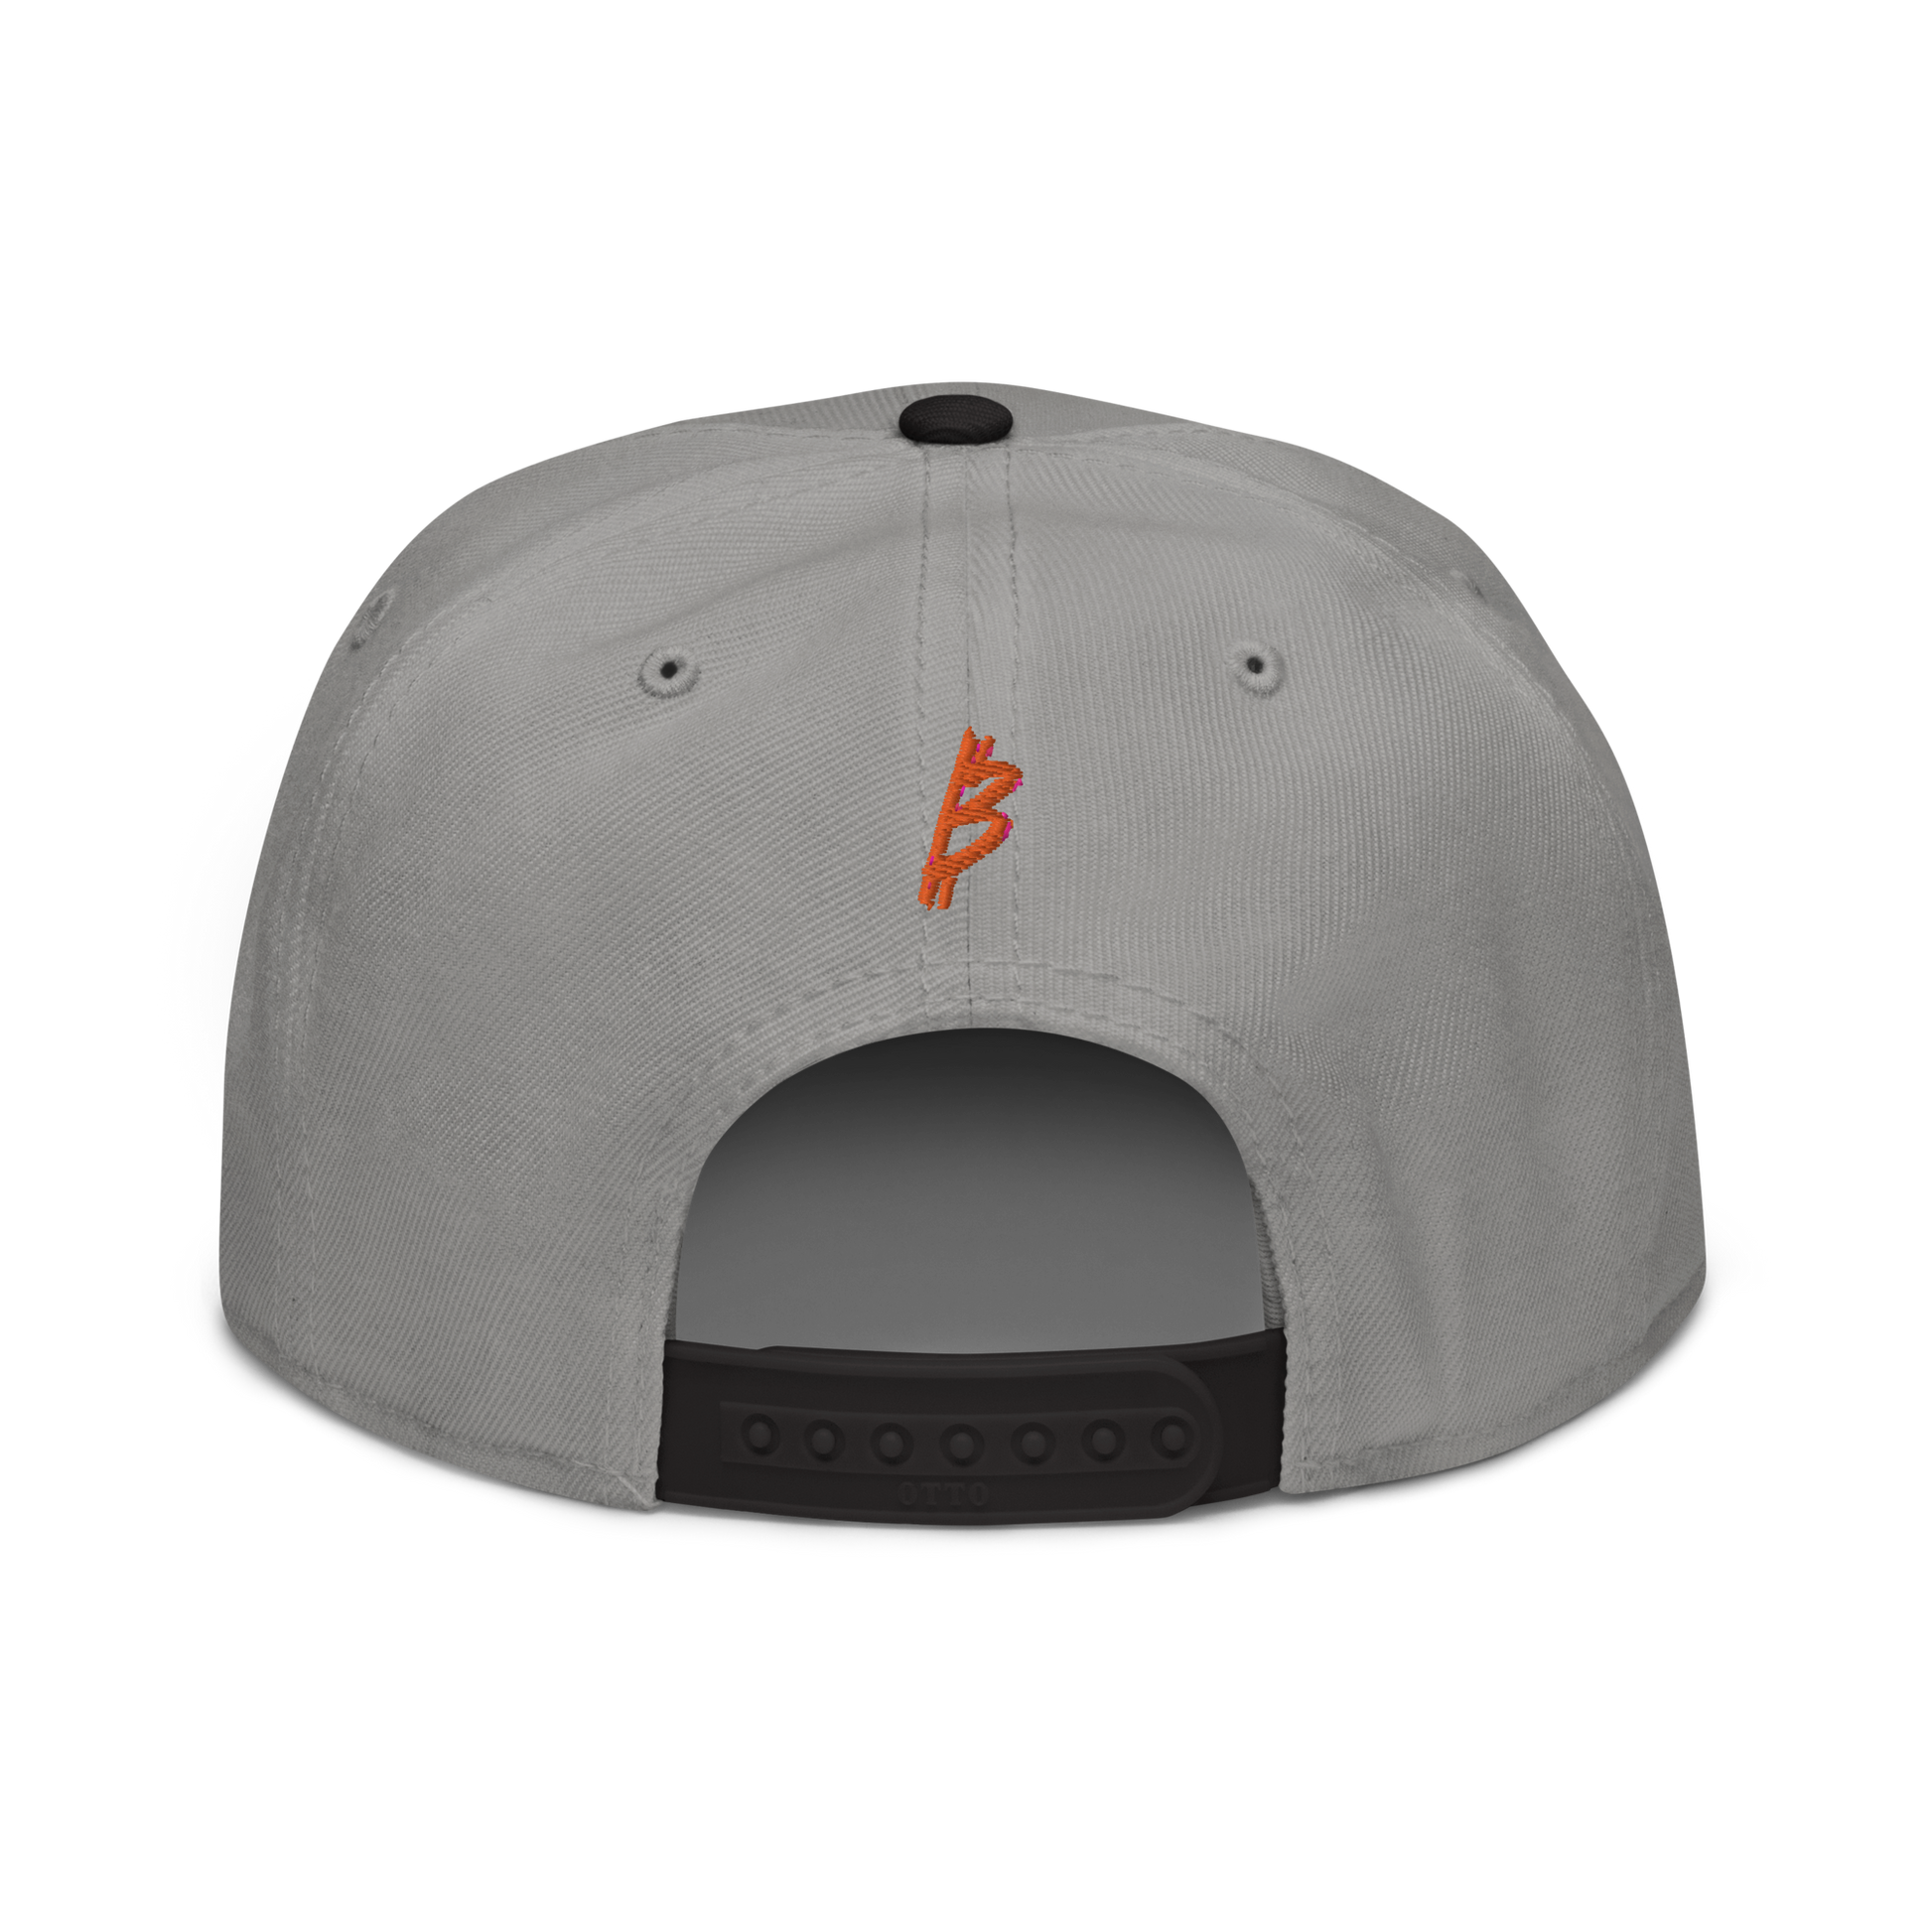 Back view of a grey and black bitcoin snapback hat.